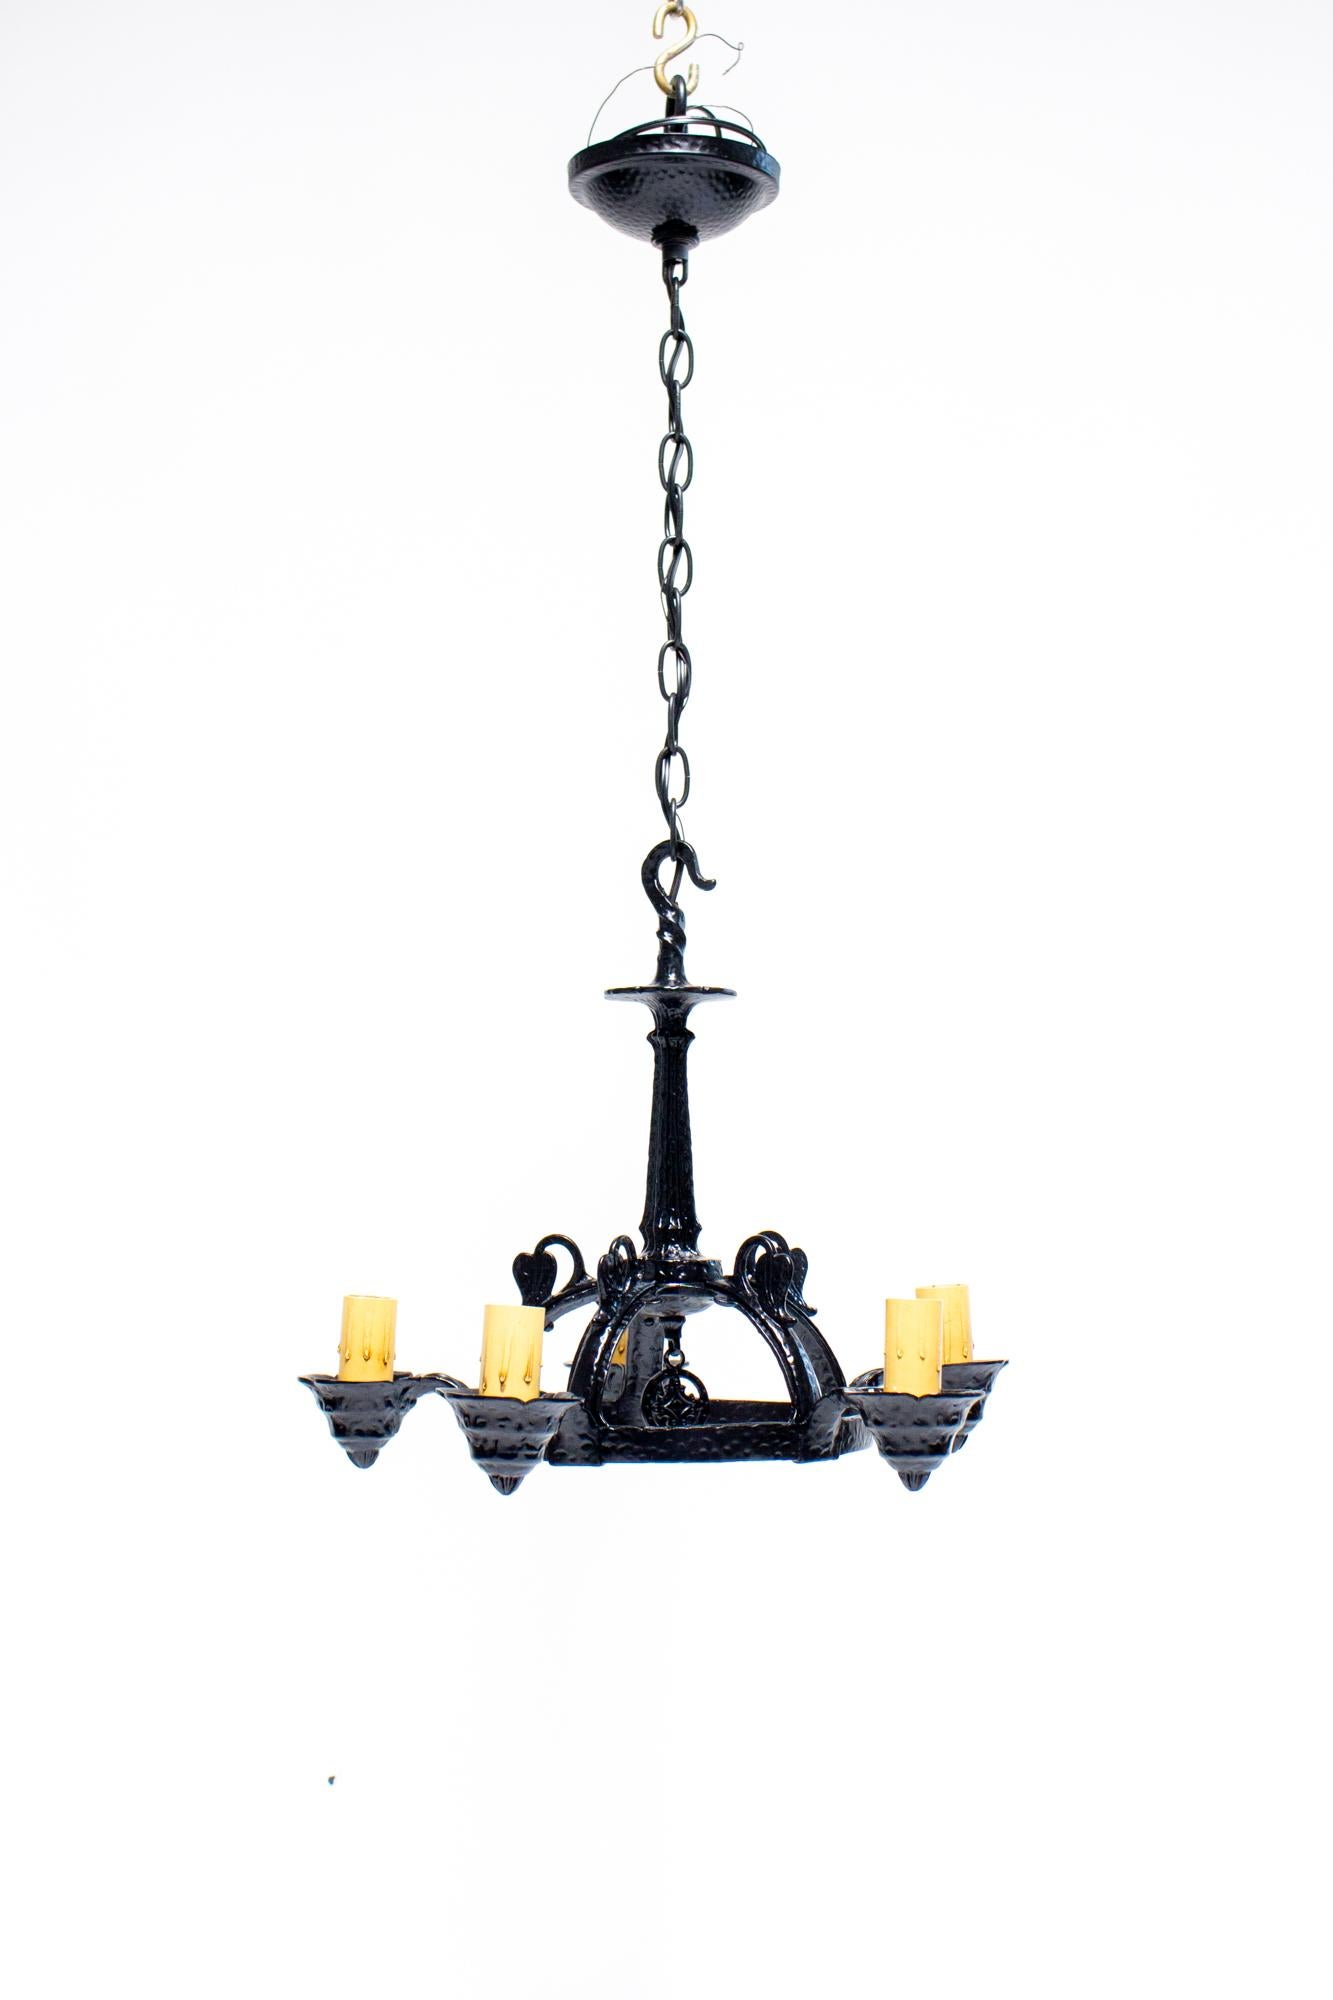 1930’s arts and crafts black Virden Chandelier. A Five Light chandelier, cast iron, painted black. Arts and crafts style with curled leaves on each arm. 

Condition: Very good condition, Freshly Painted, rewired with new candlecovers. US 110-120V